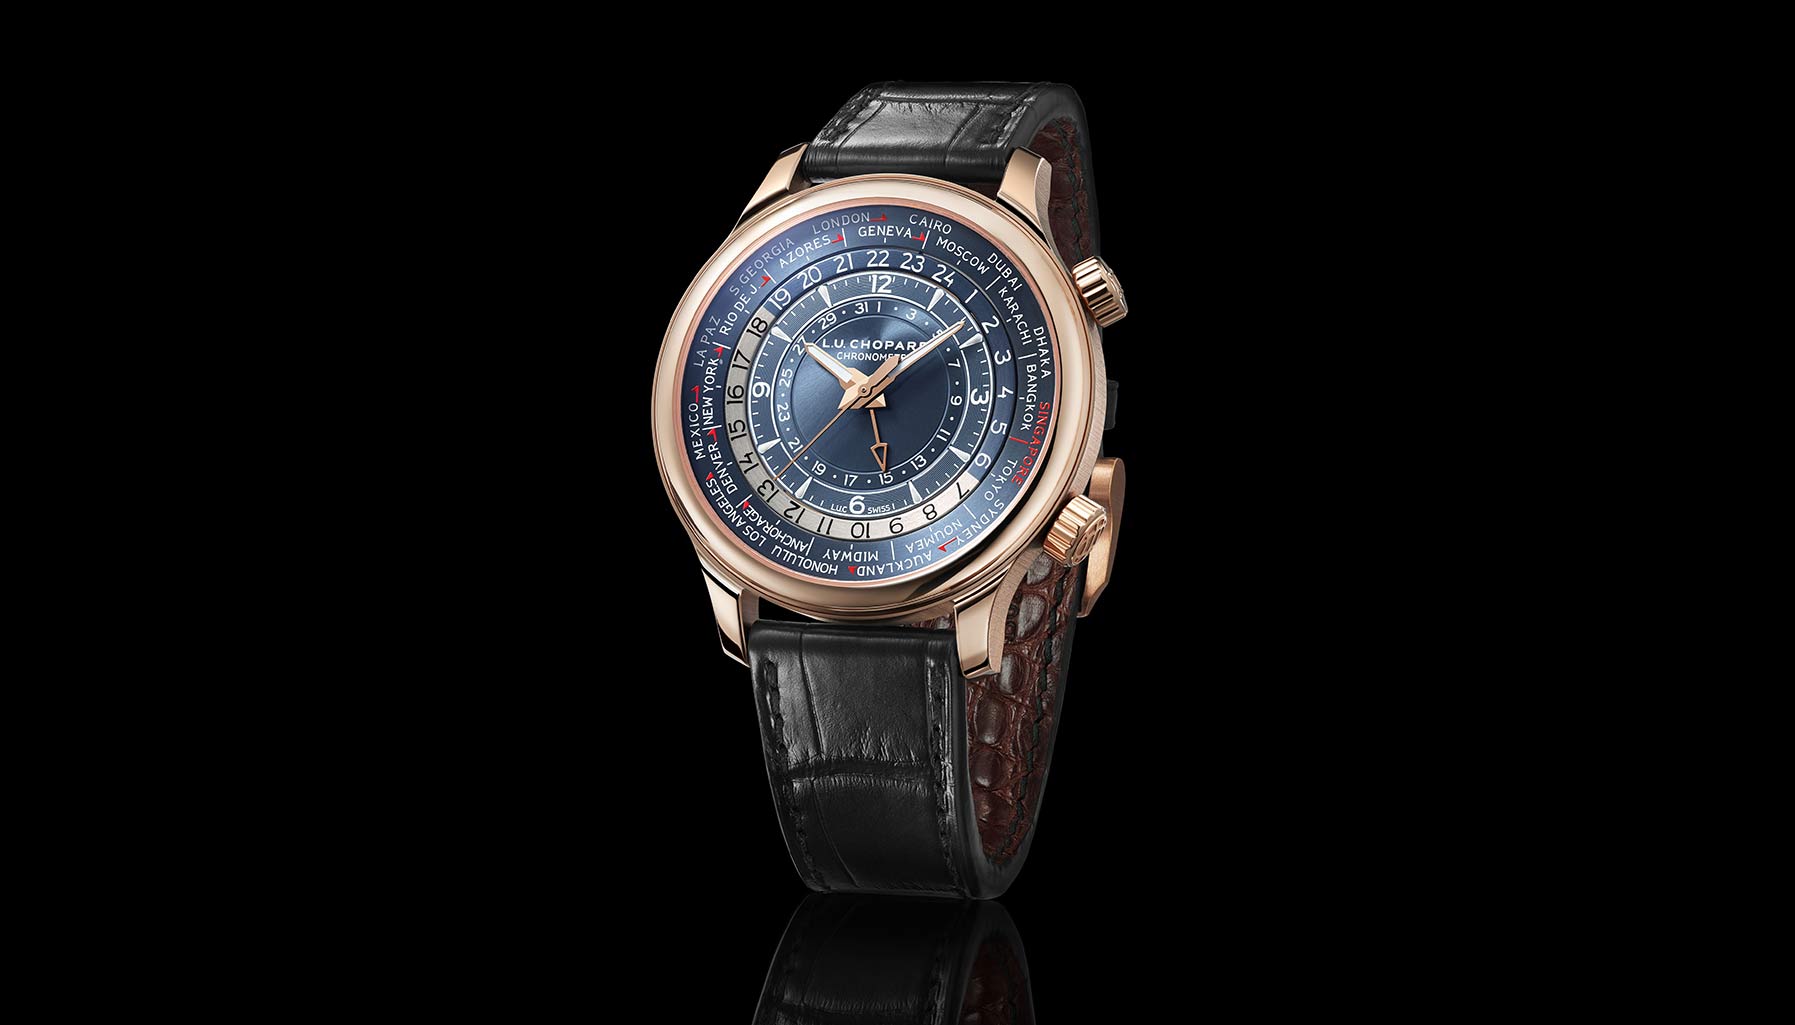 Chopard LUC Time Traveler One – Singapore Edition